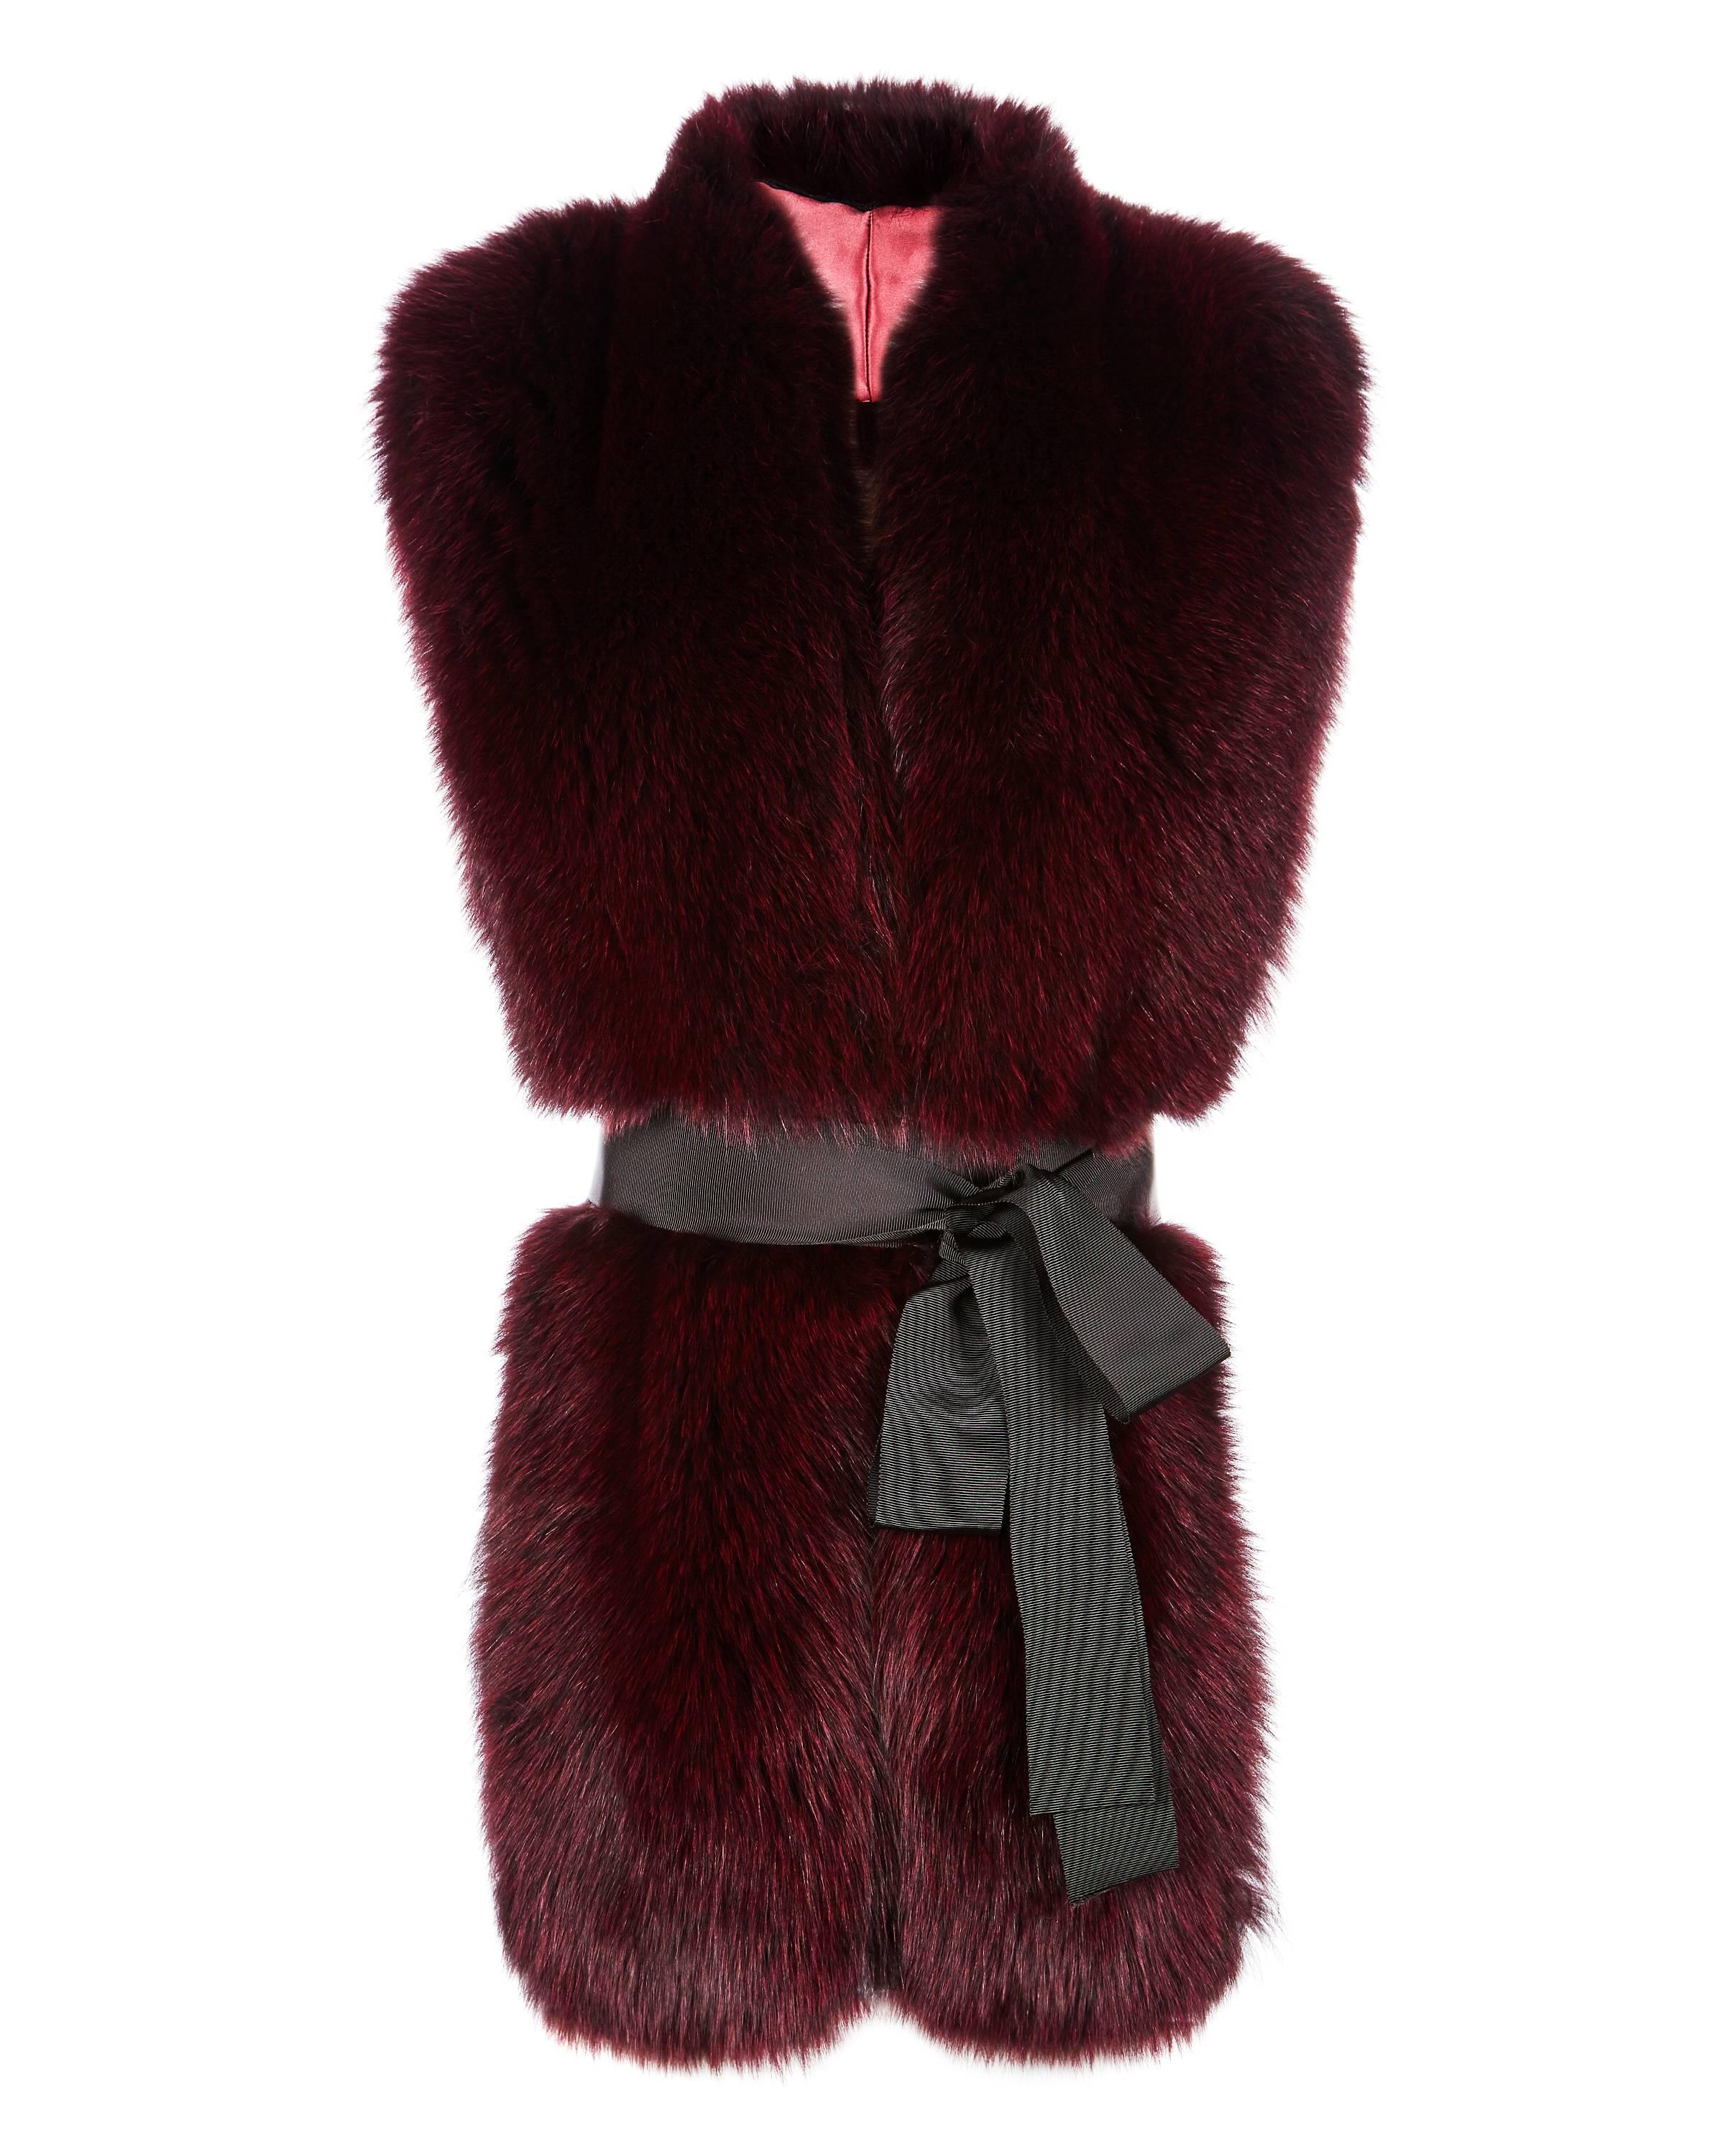 Verheyen London Legacy Stole in Garnet Fox Fur & Silk Lining - Brand New 

The Legacy Stole is Verheyen London’s versatile design to be worn from day to night. Crafted in the finest dyed fox fur and lined in coloured silk satin.  A structured design